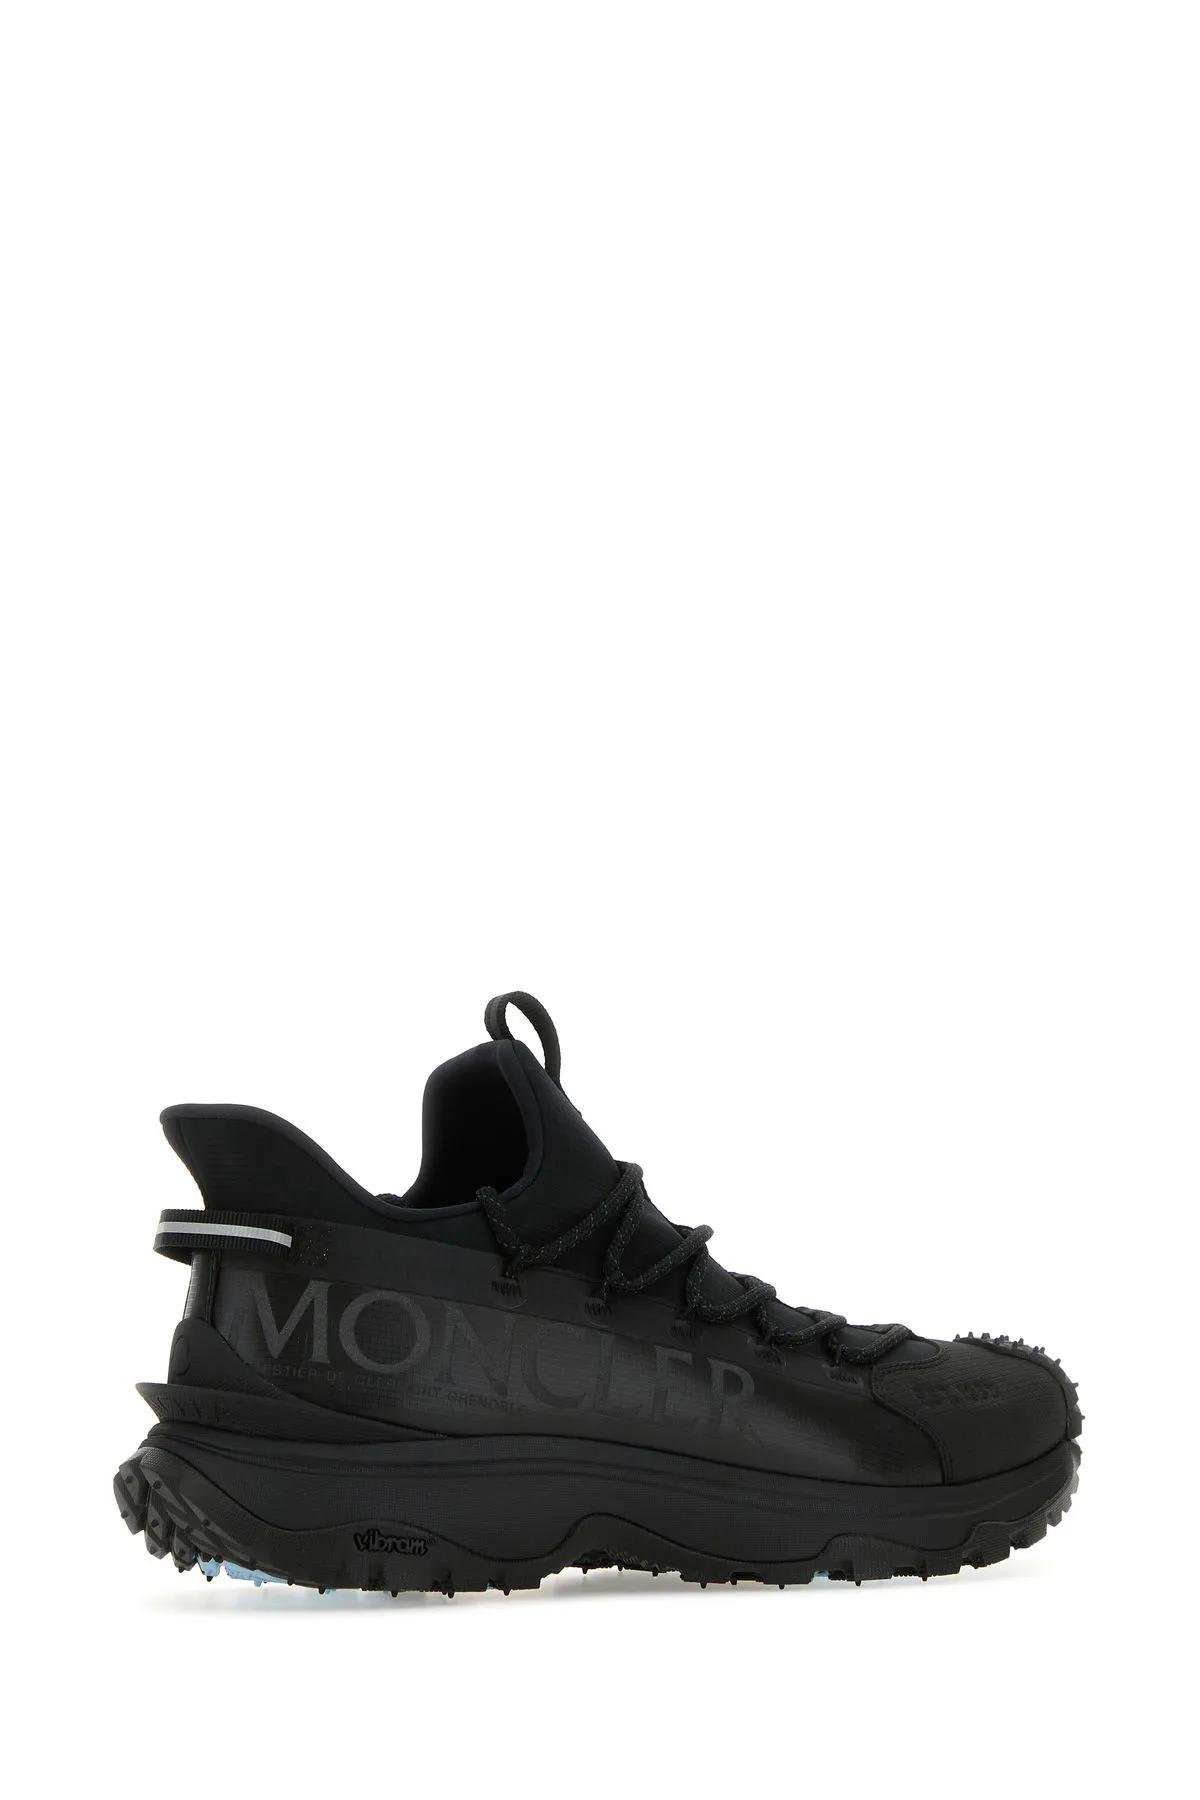 Shop Moncler Black Fabric And Rubber Trailgrip Lite2 Sneakers